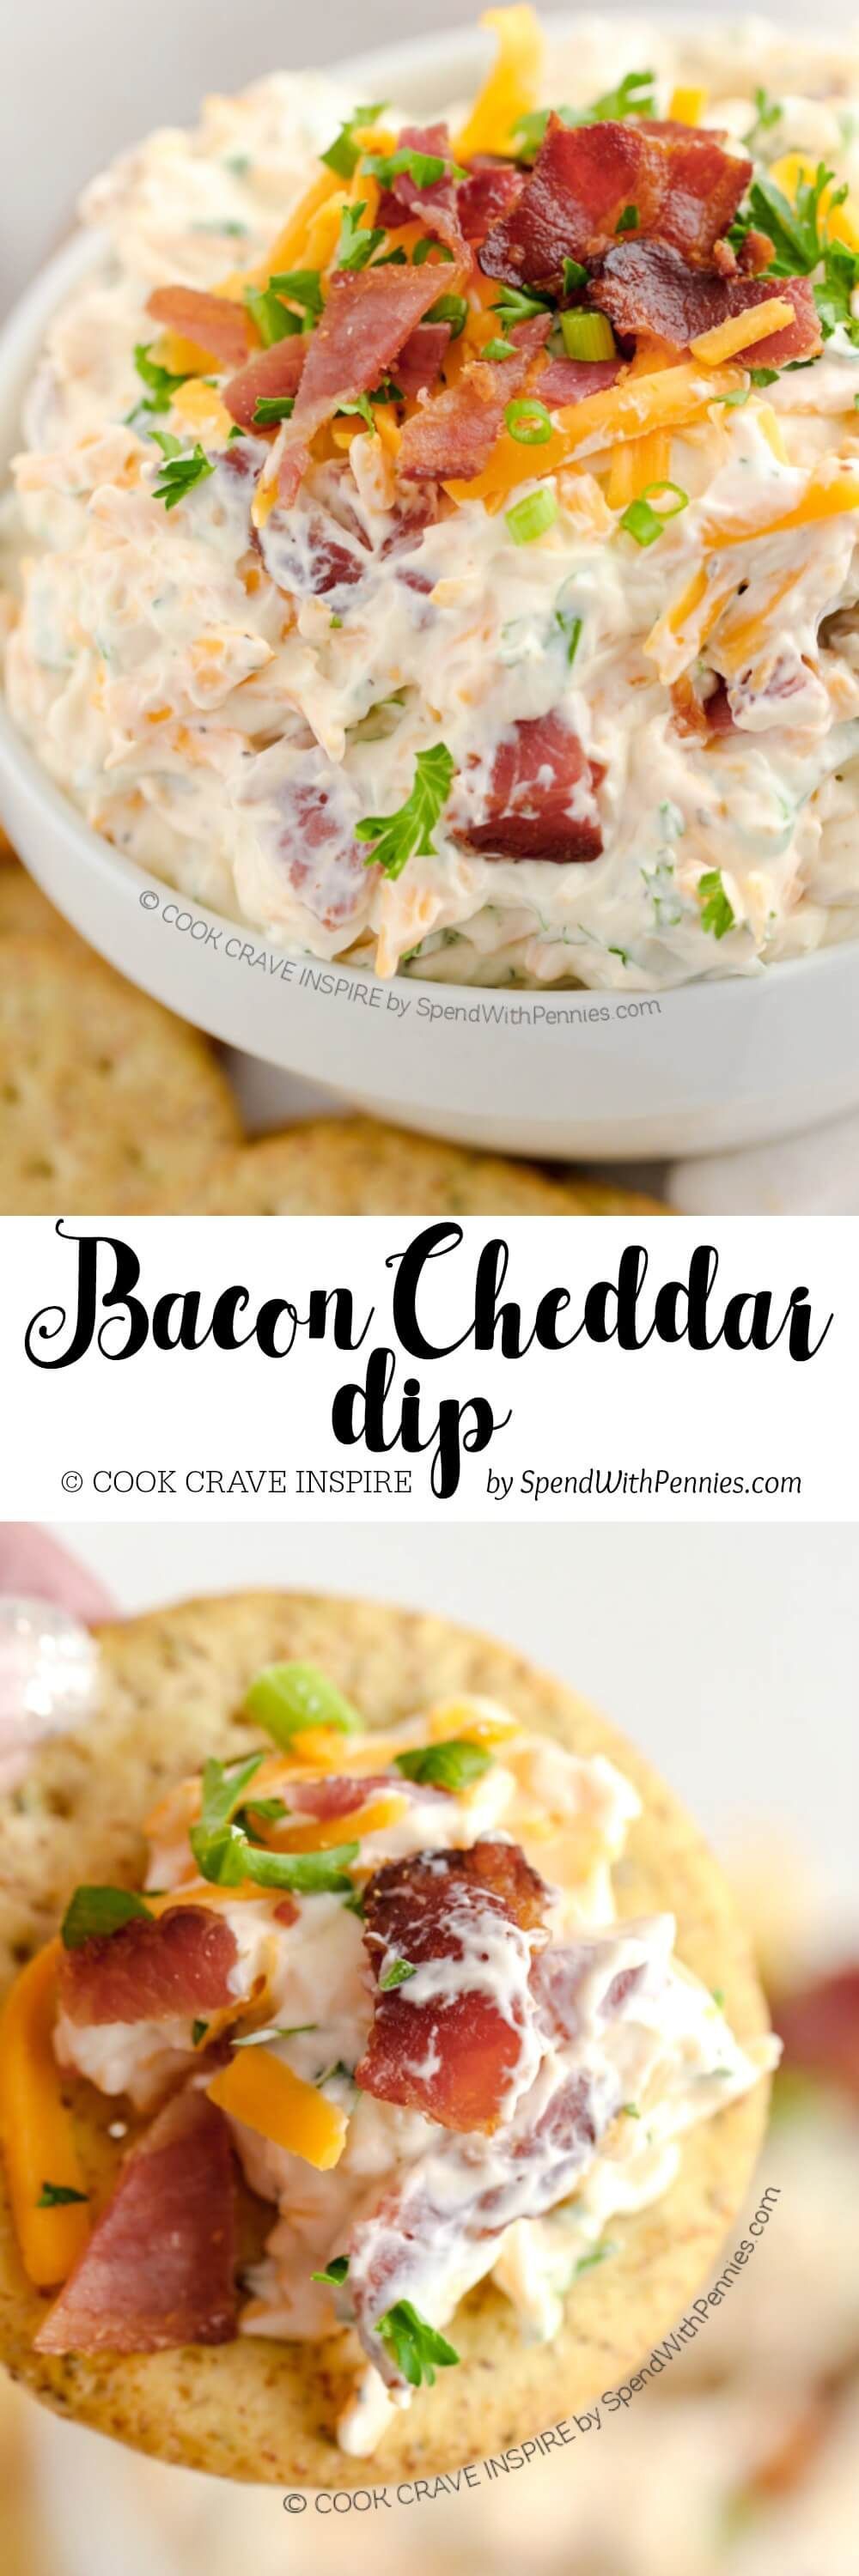 This delicious Bacon Cheddar Cheese dip takes just 5 minutes to make and is the hit of every party! Pe